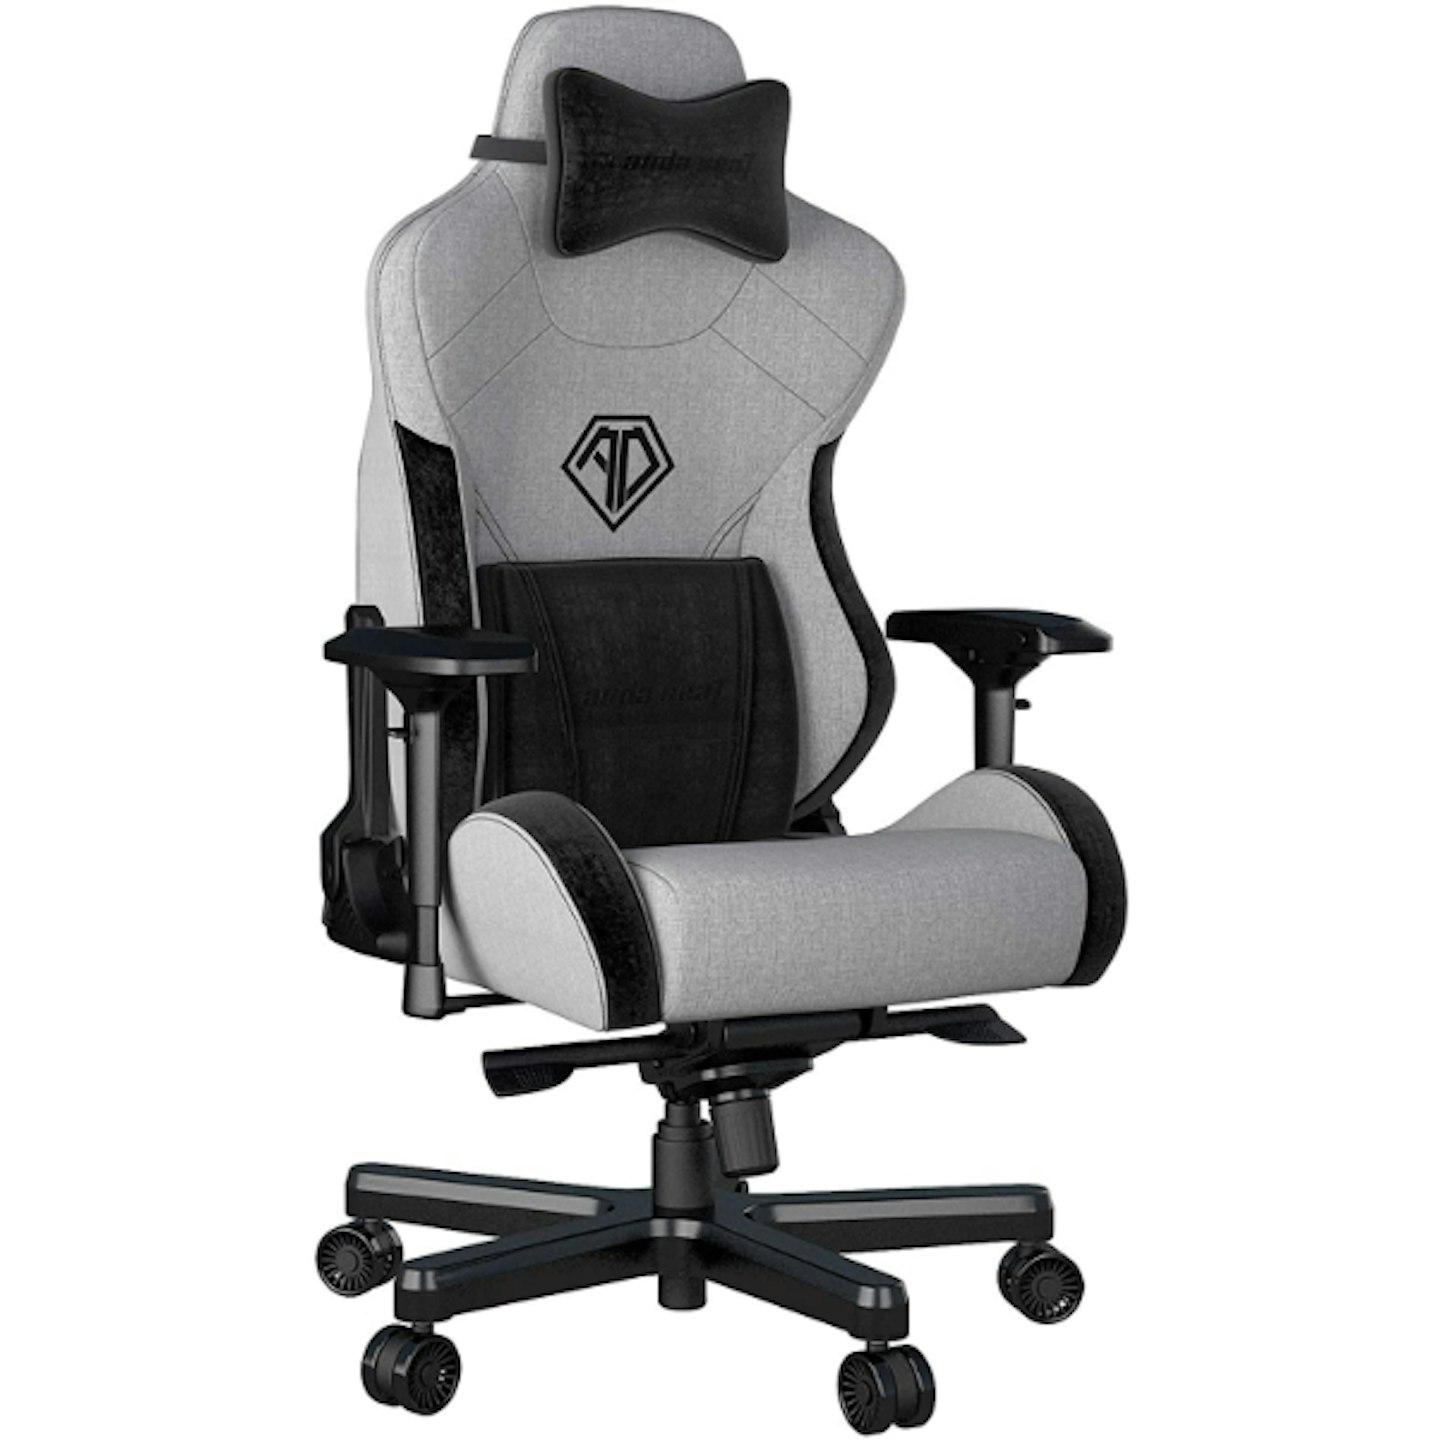 Pros: Very comfortable with a deluxe, expectation-defying lumbar cushion  Cons: Unoriginal style, disappointing finishing touches and sub-par armrest adjustments